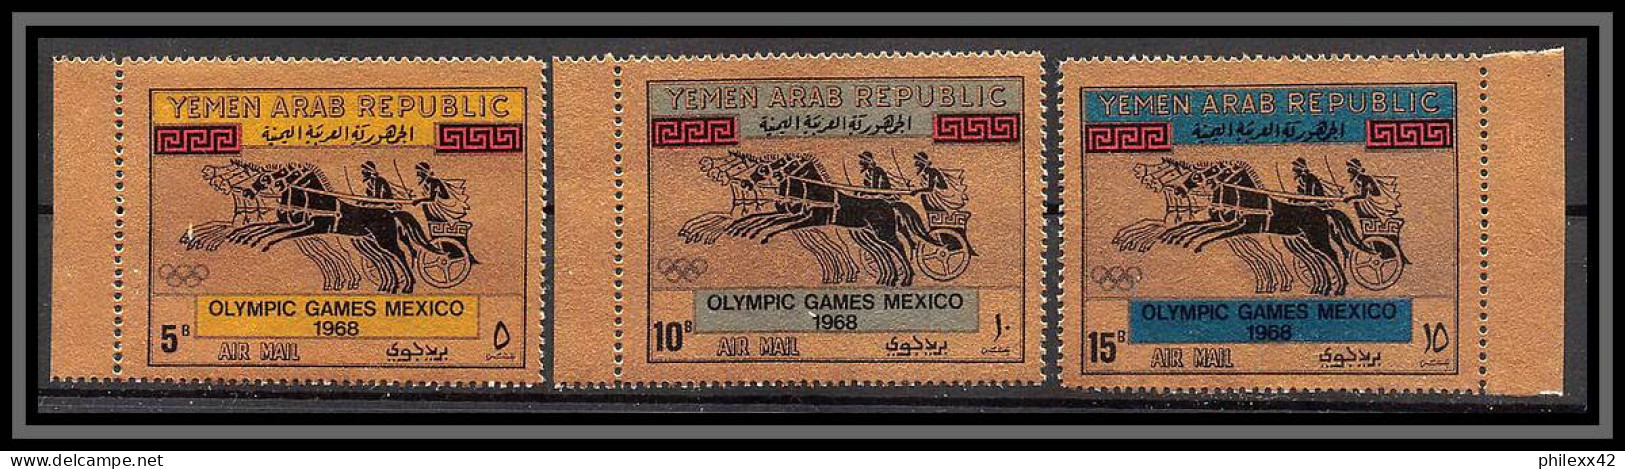 Nord Yemen YAR - 4402/ N°742/744 Jeux Olympiques (olympic Games) Mexico 1968 OR Gold Stamps Neuf ** MNH - Estate 1968: Messico